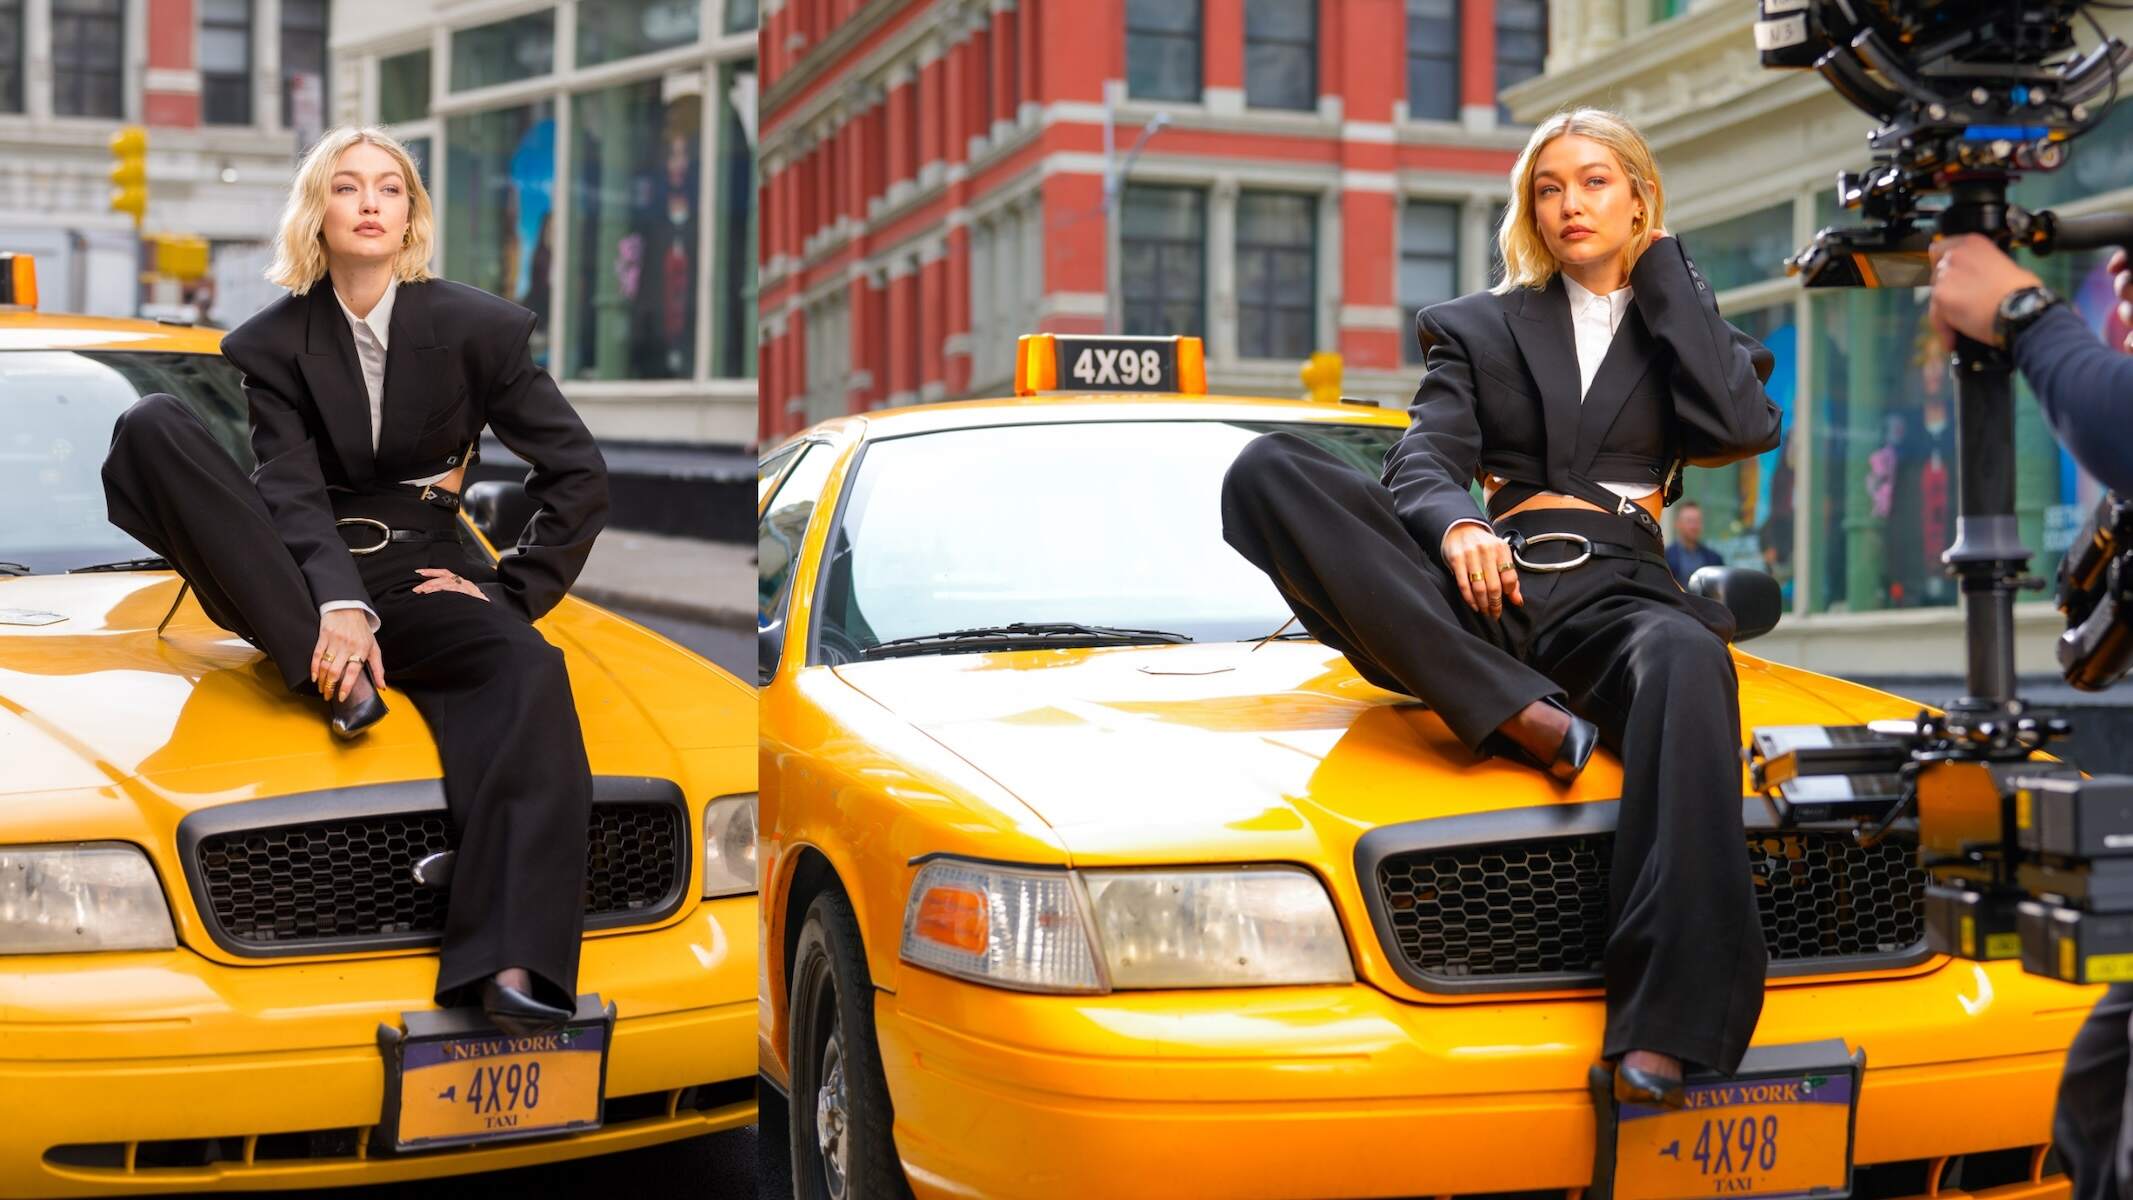 Model Gigi Hadid wears a black jacket and pants and sits on a taxi while filming a video for Maybelline on a NYC street